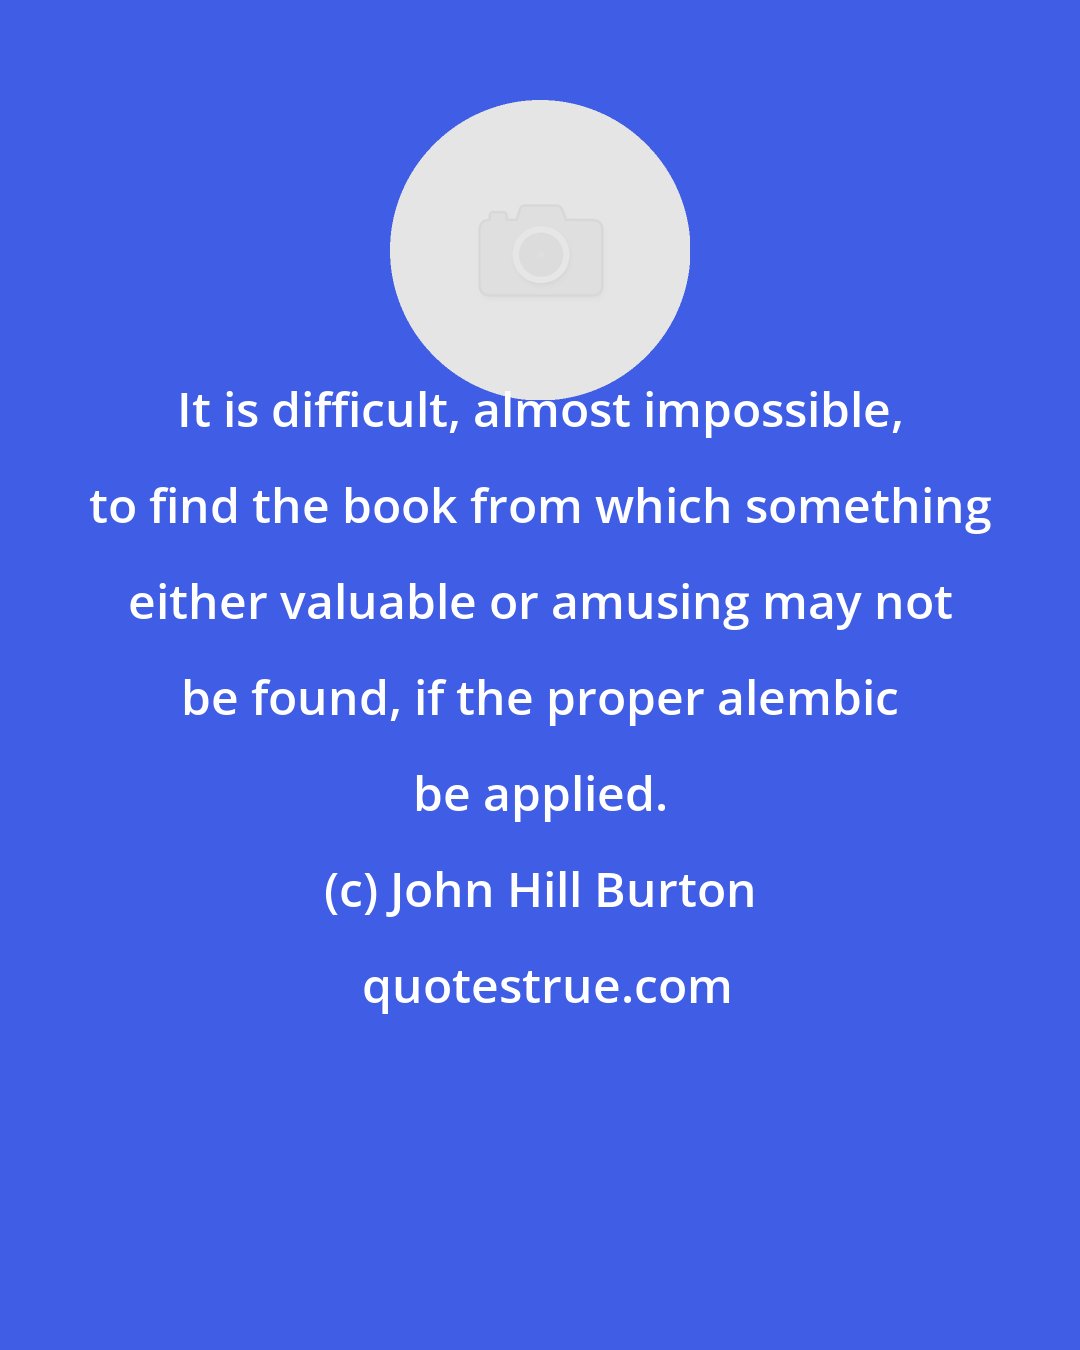 John Hill Burton: It is difficult, almost impossible, to find the book from which something either valuable or amusing may not be found, if the proper alembic be applied.